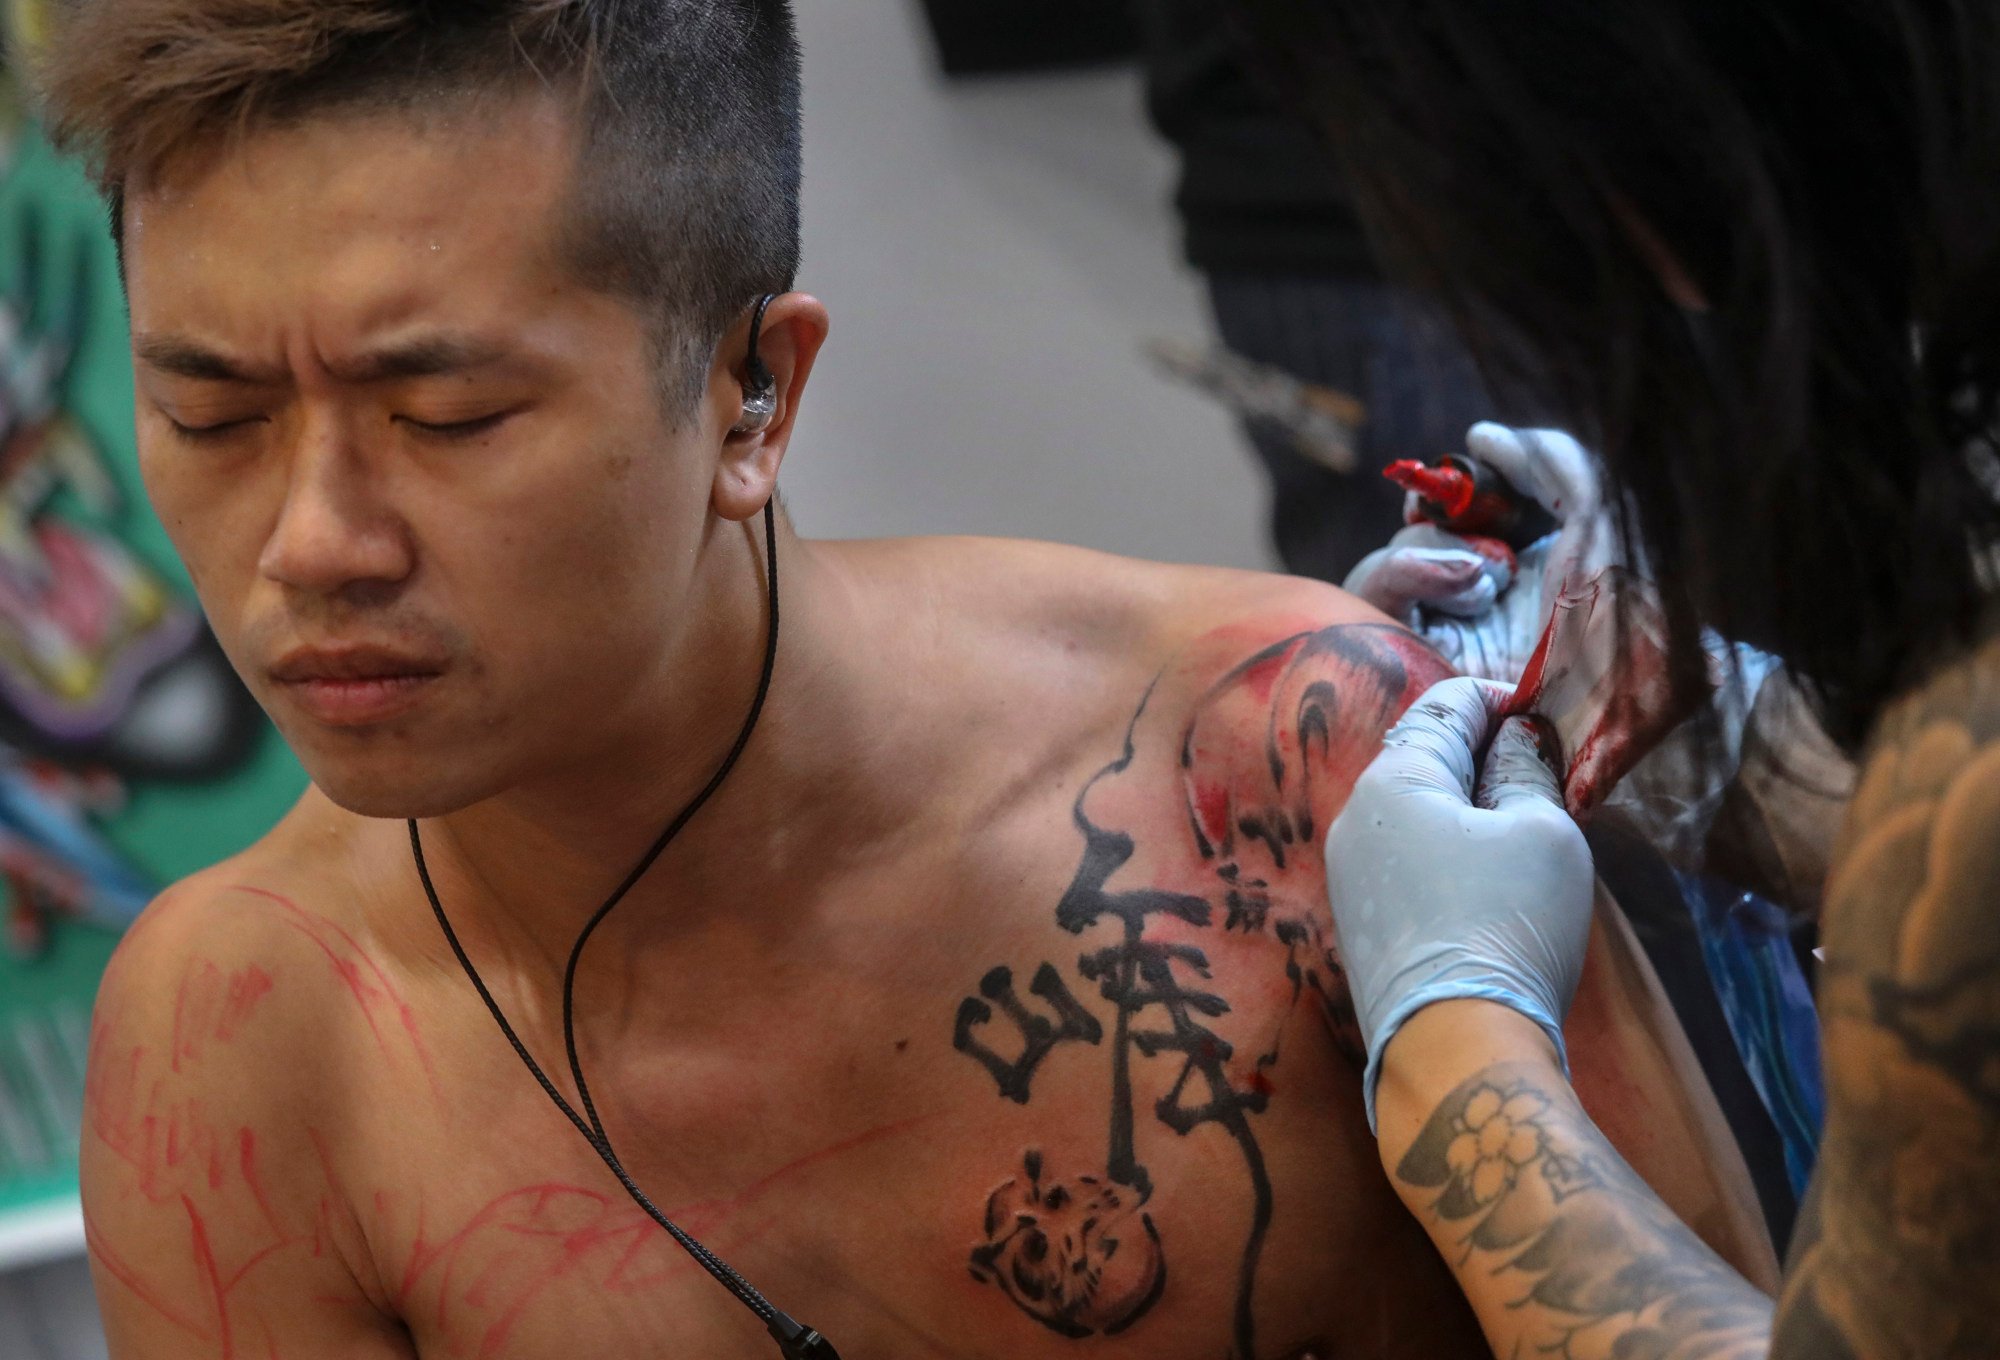 China's tattoo ban for minors criticised as circular logic and irrational fear of difference, but many welcome new rules